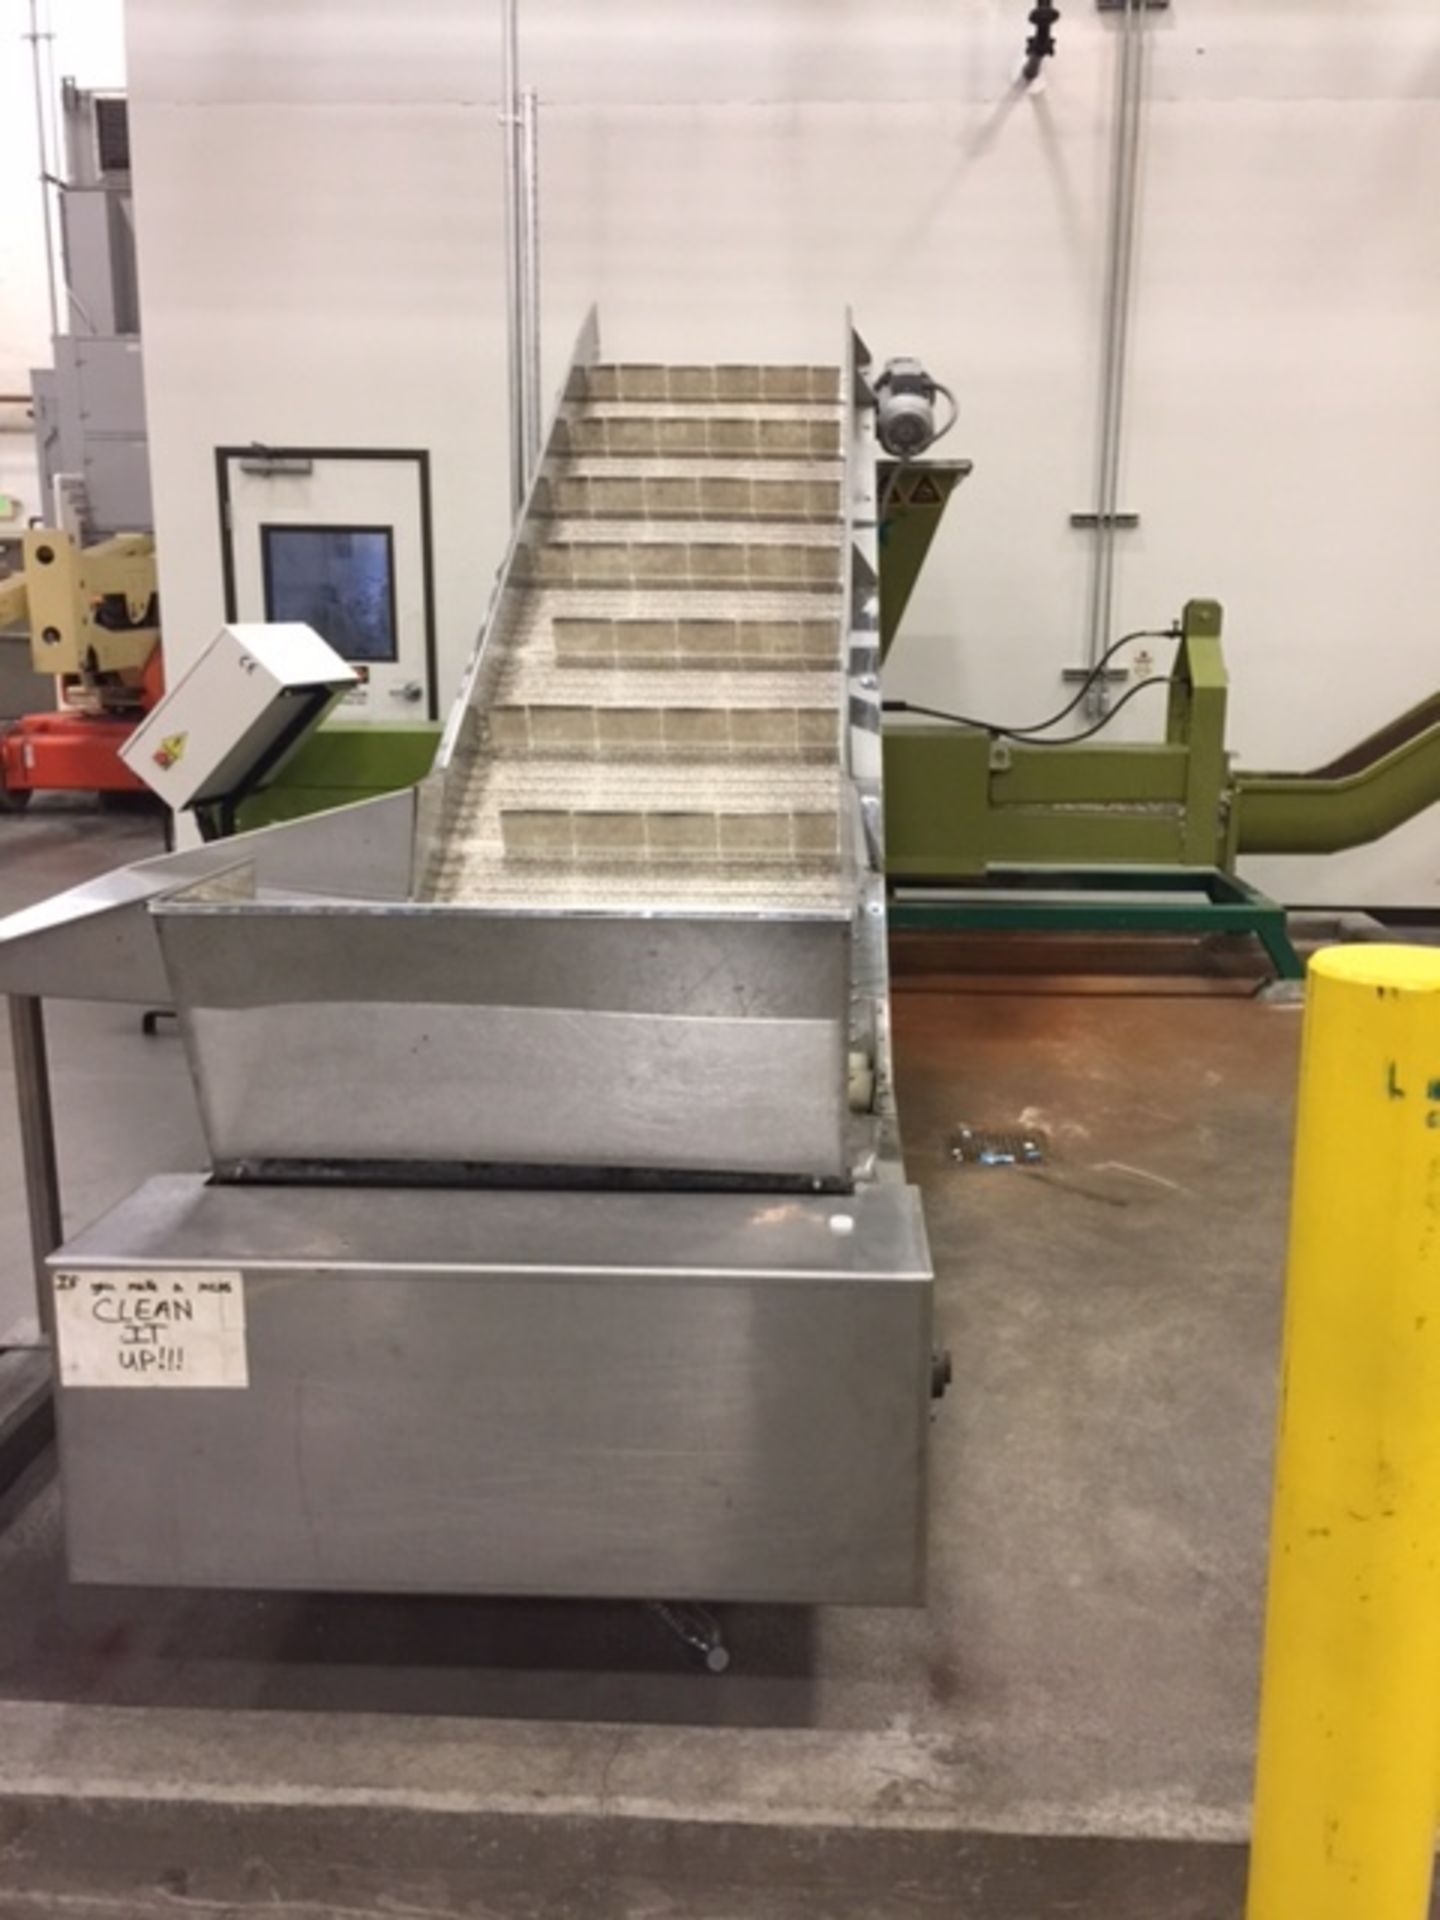 2013 Greenmax PET Bottle Compactor, Model C350 (Located in Denver) - Image 5 of 6